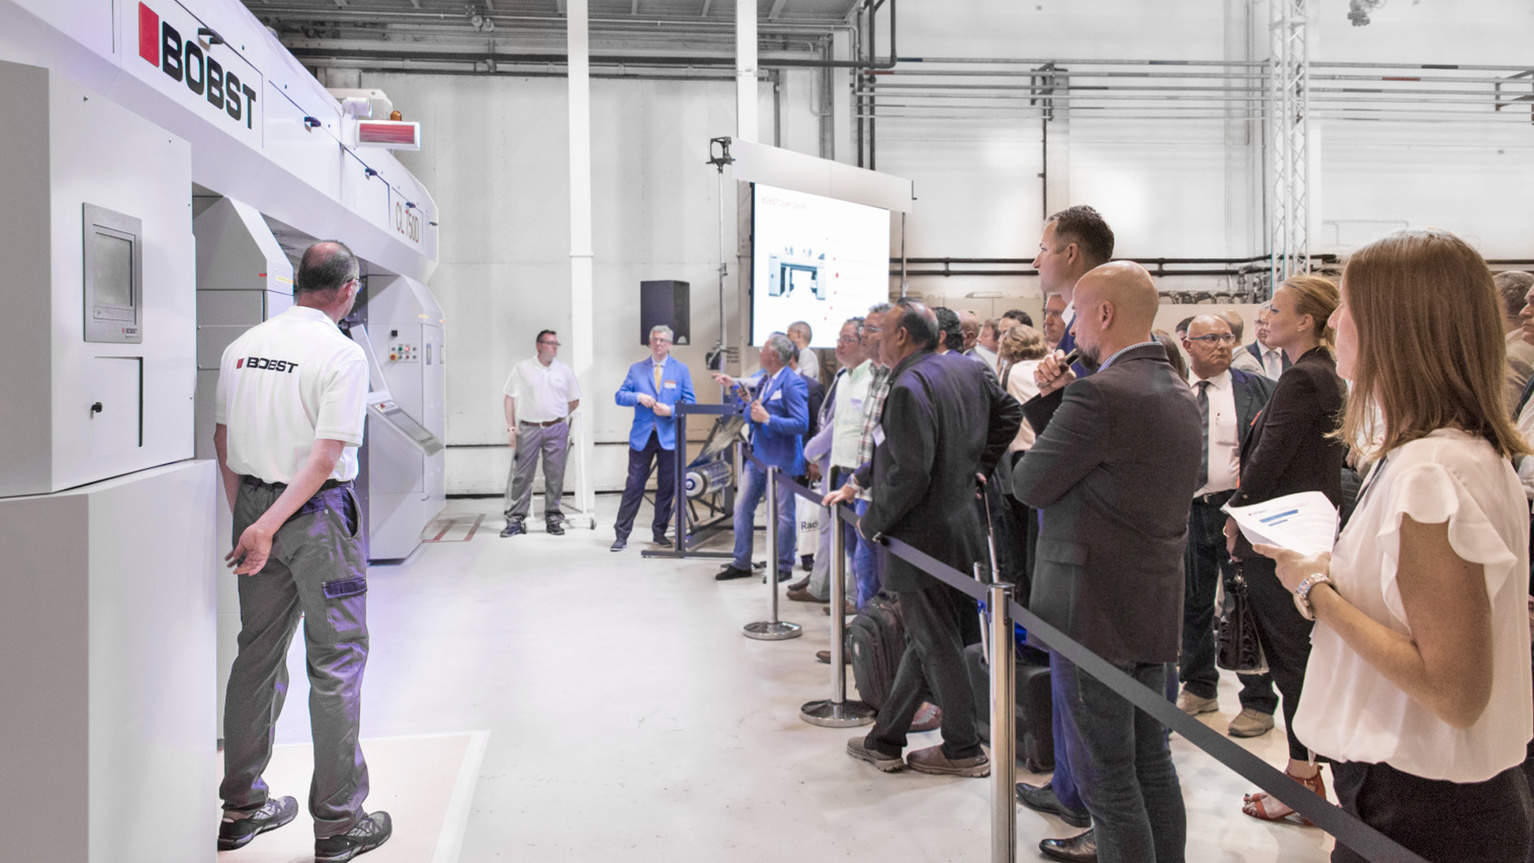 Bobst displays process applications and machines at Open Door event in Italy